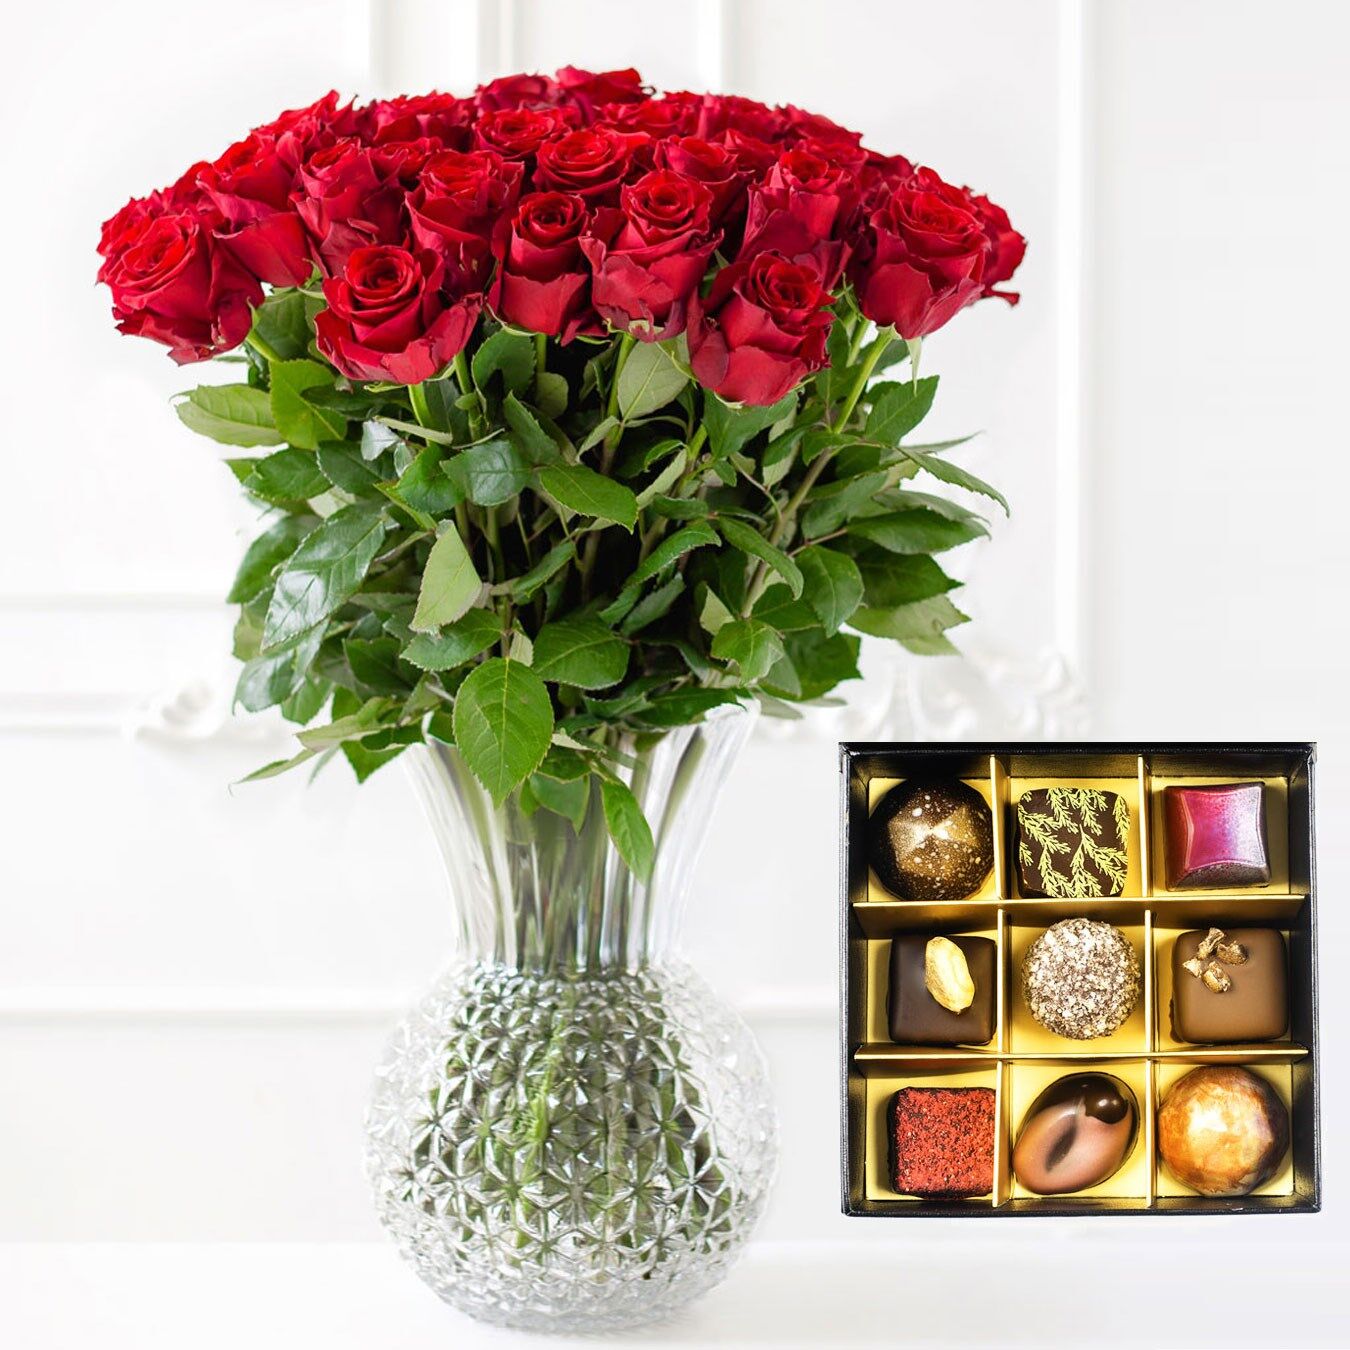 15 roses and a box of chocolates